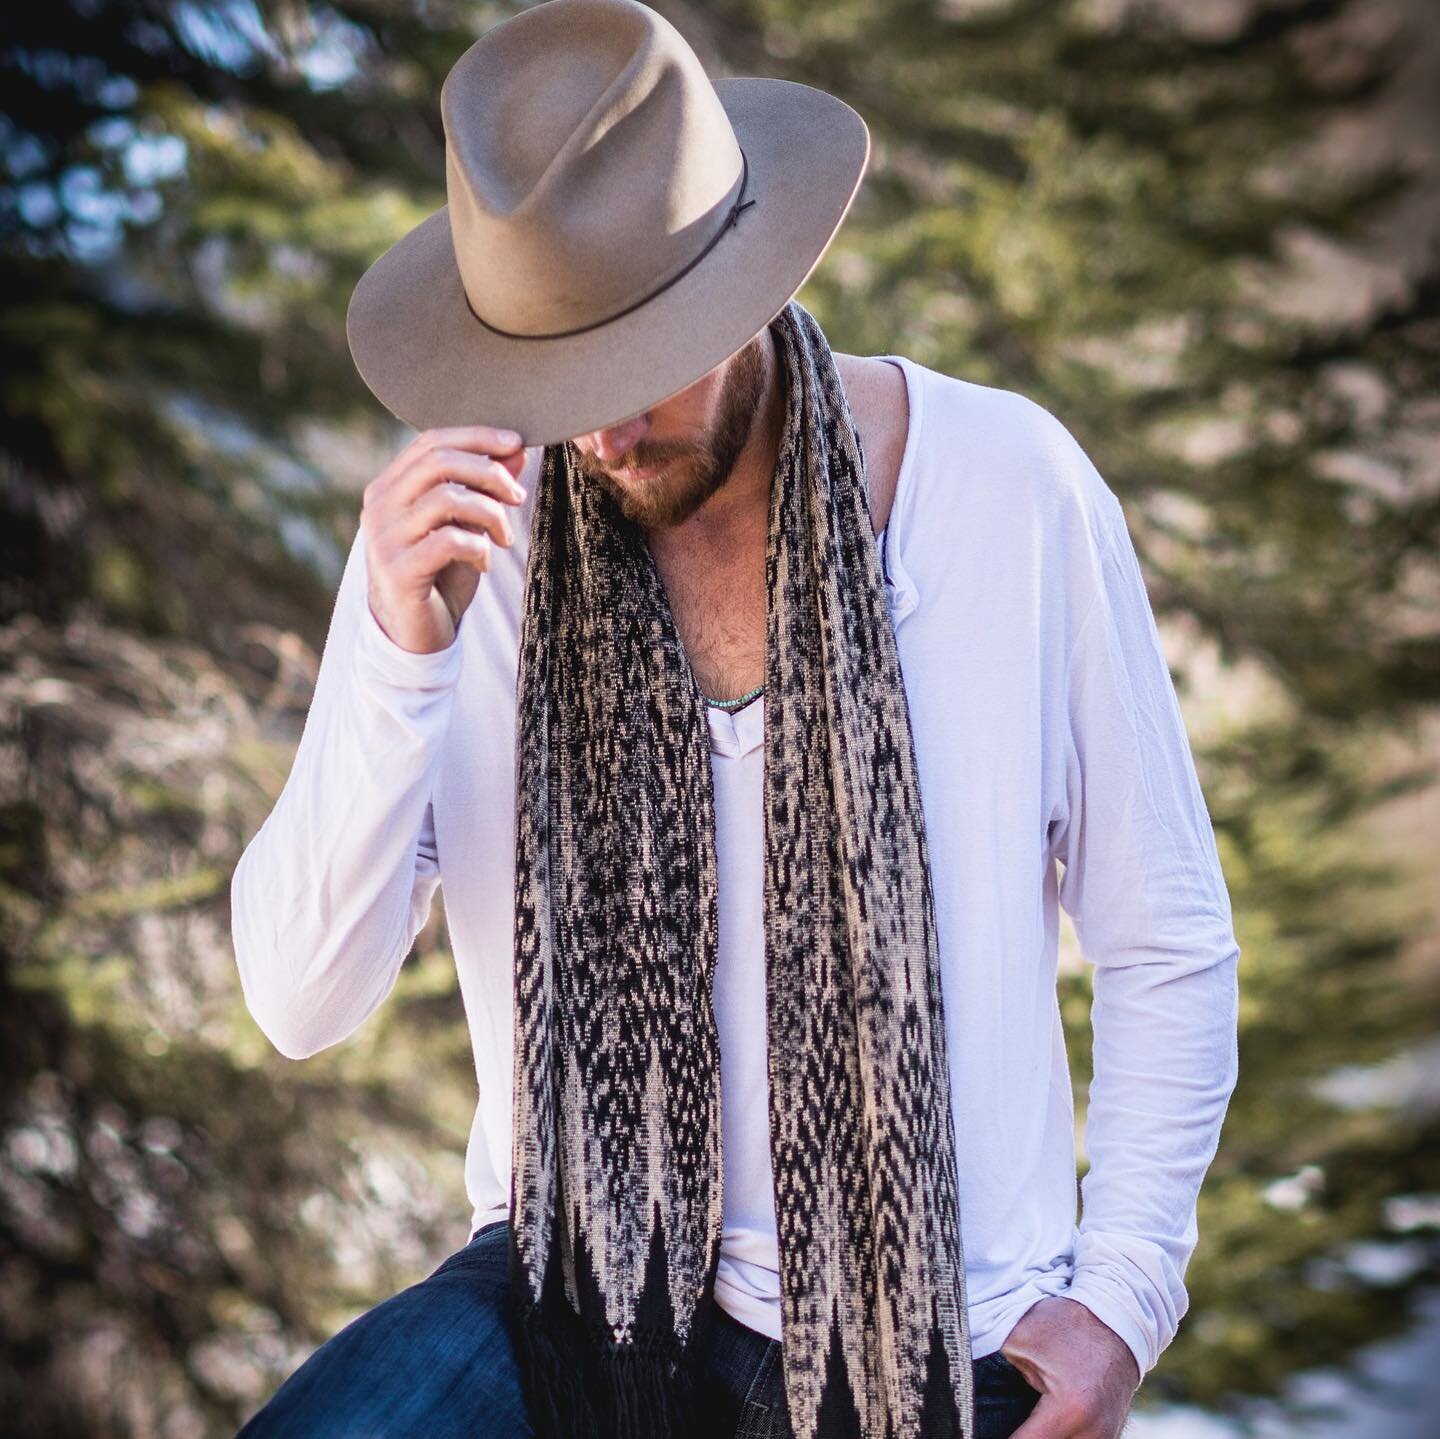 Introducing our hand-woven + hand-dyed Ecuadorian Scarves. The perfect accessory to accompany your custom hat. 
&bull;
&bull;
&bull; 📷 @siriraitto 
#aspenhatter #customhats #bespoke #artisans #locallymade #customhat #hatter #westernvibes #aspen #asp